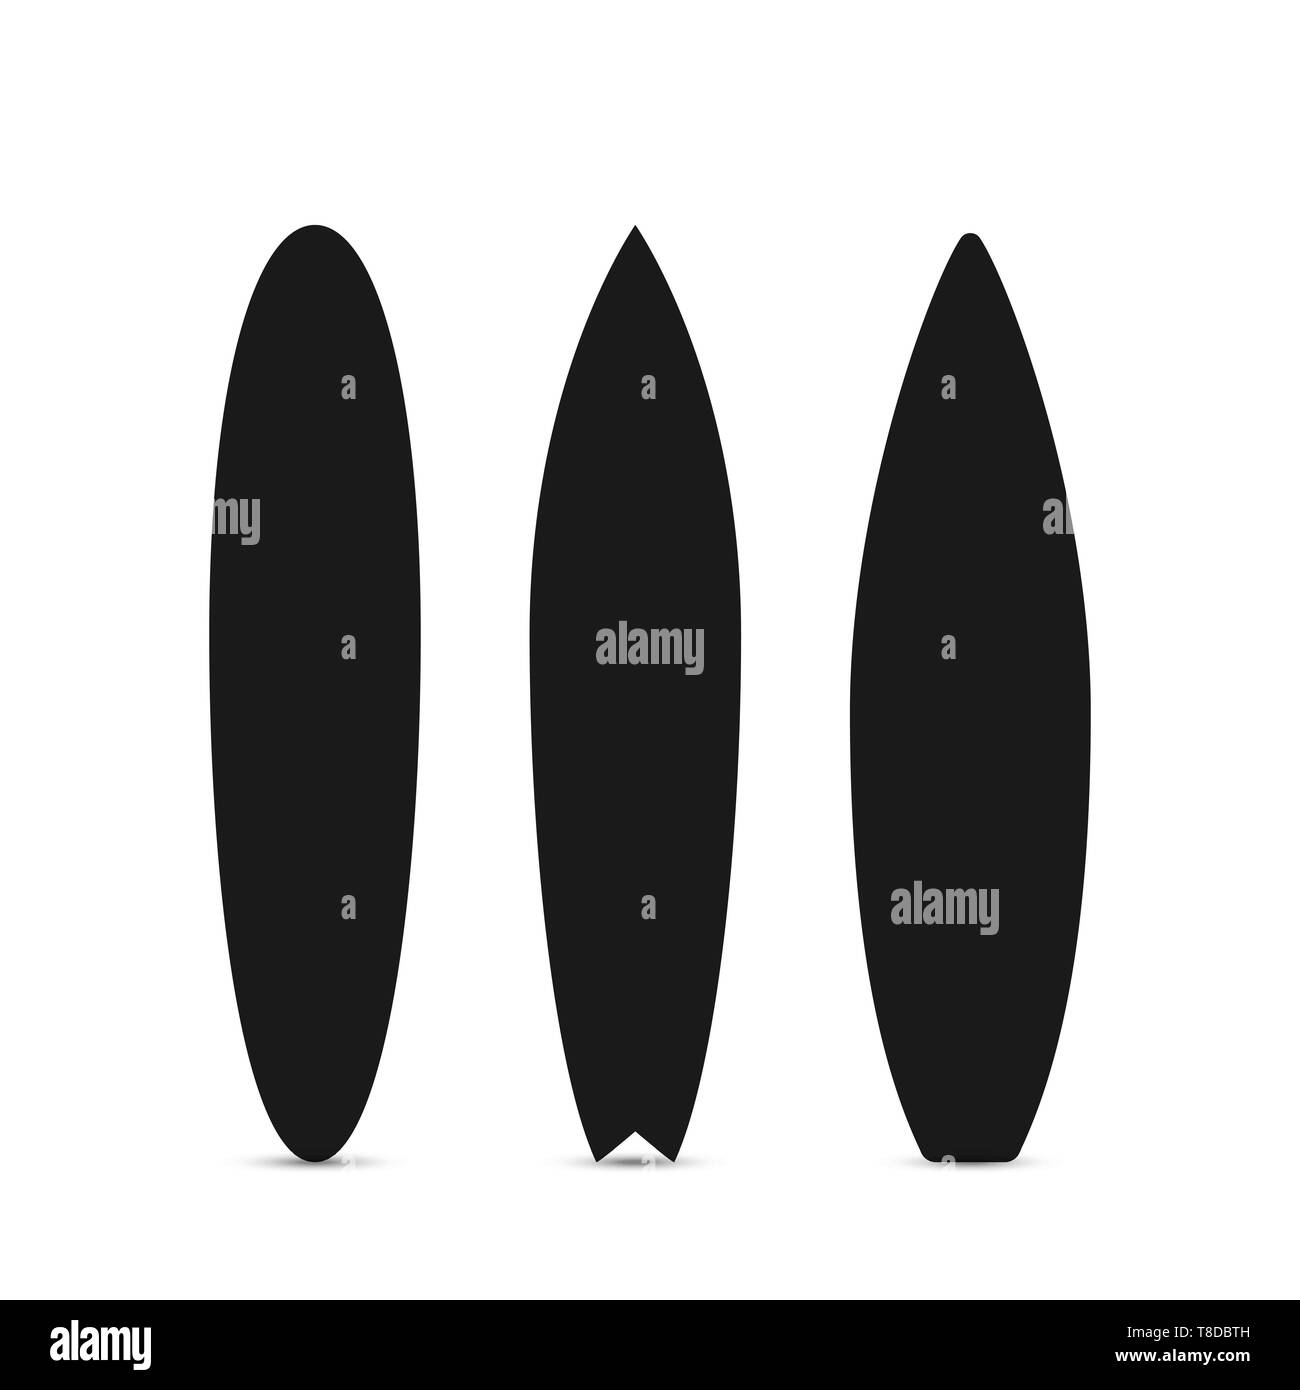 Surfboard set. Black silhouette of surfboard. Vector illustration isolated on white background Stock Vector